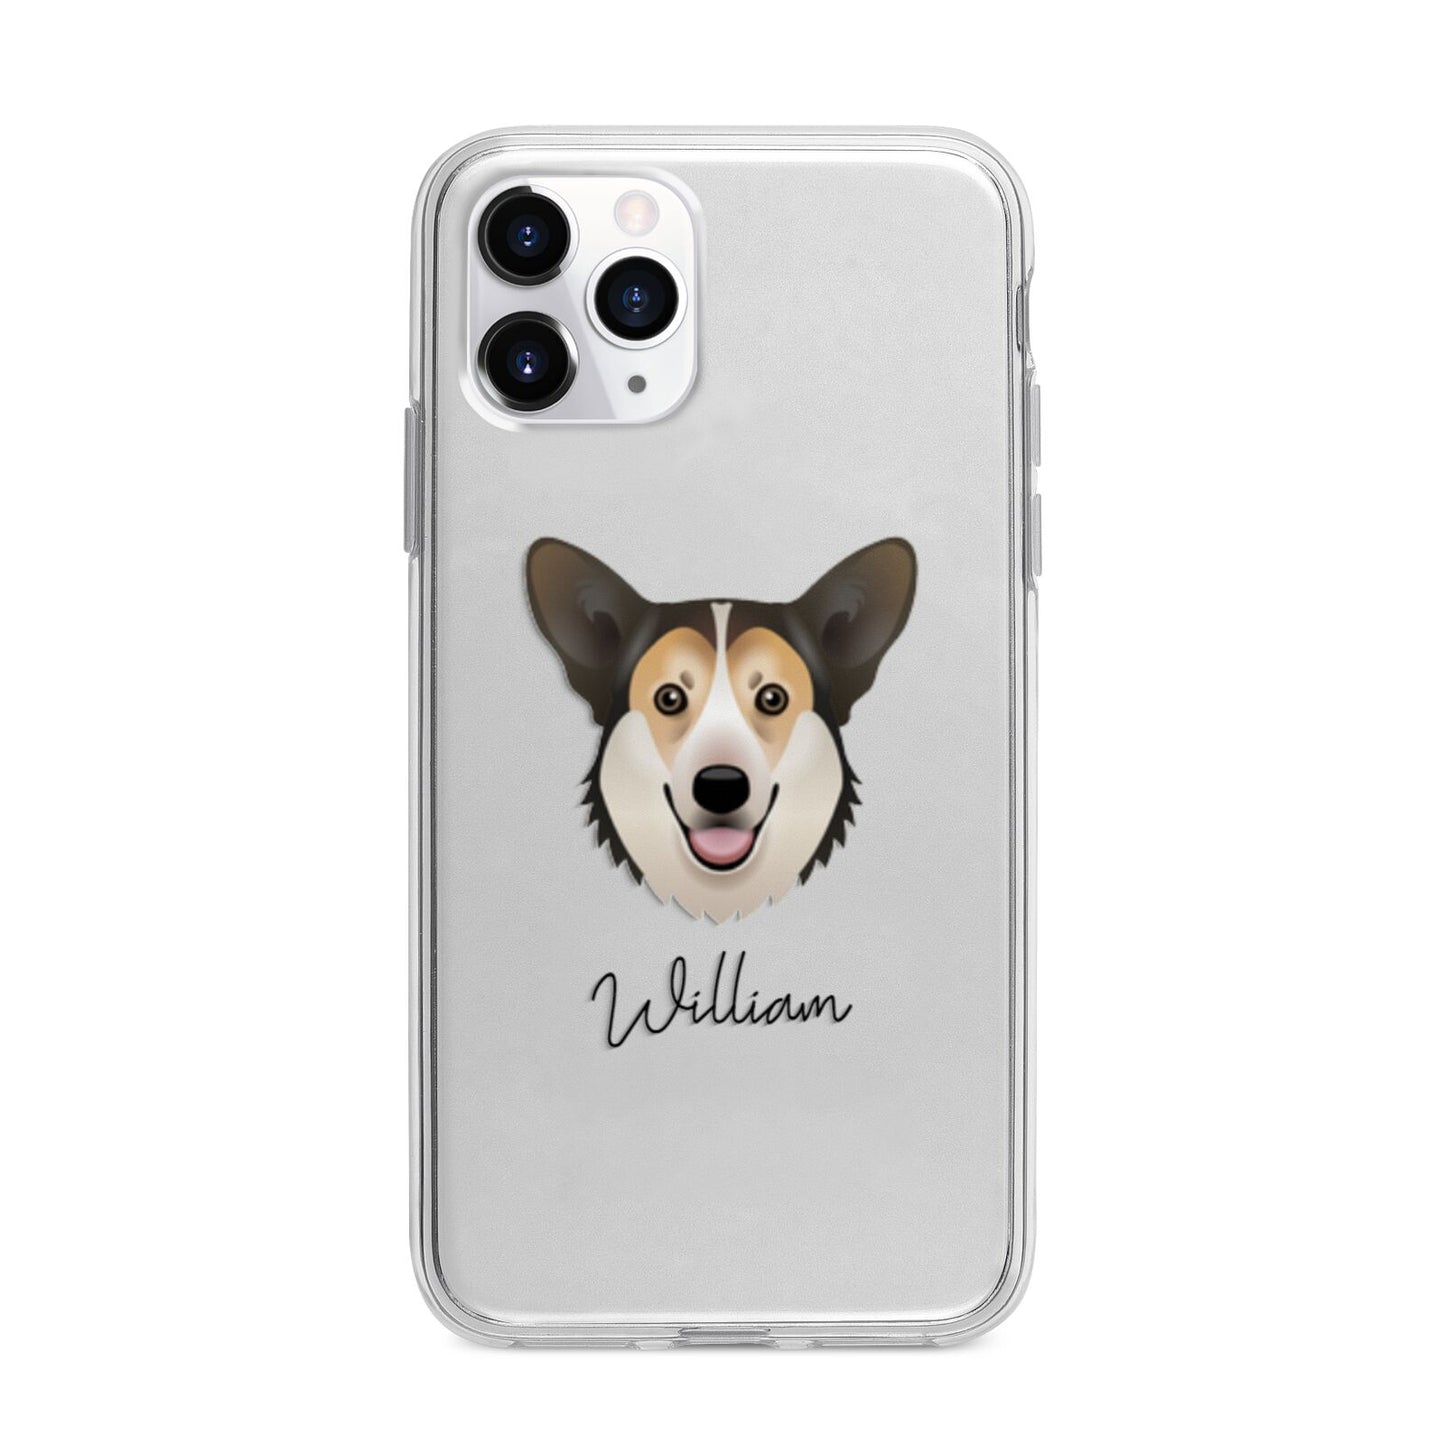 Pembroke Welsh Corgi Personalised Apple iPhone 11 Pro Max in Silver with Bumper Case